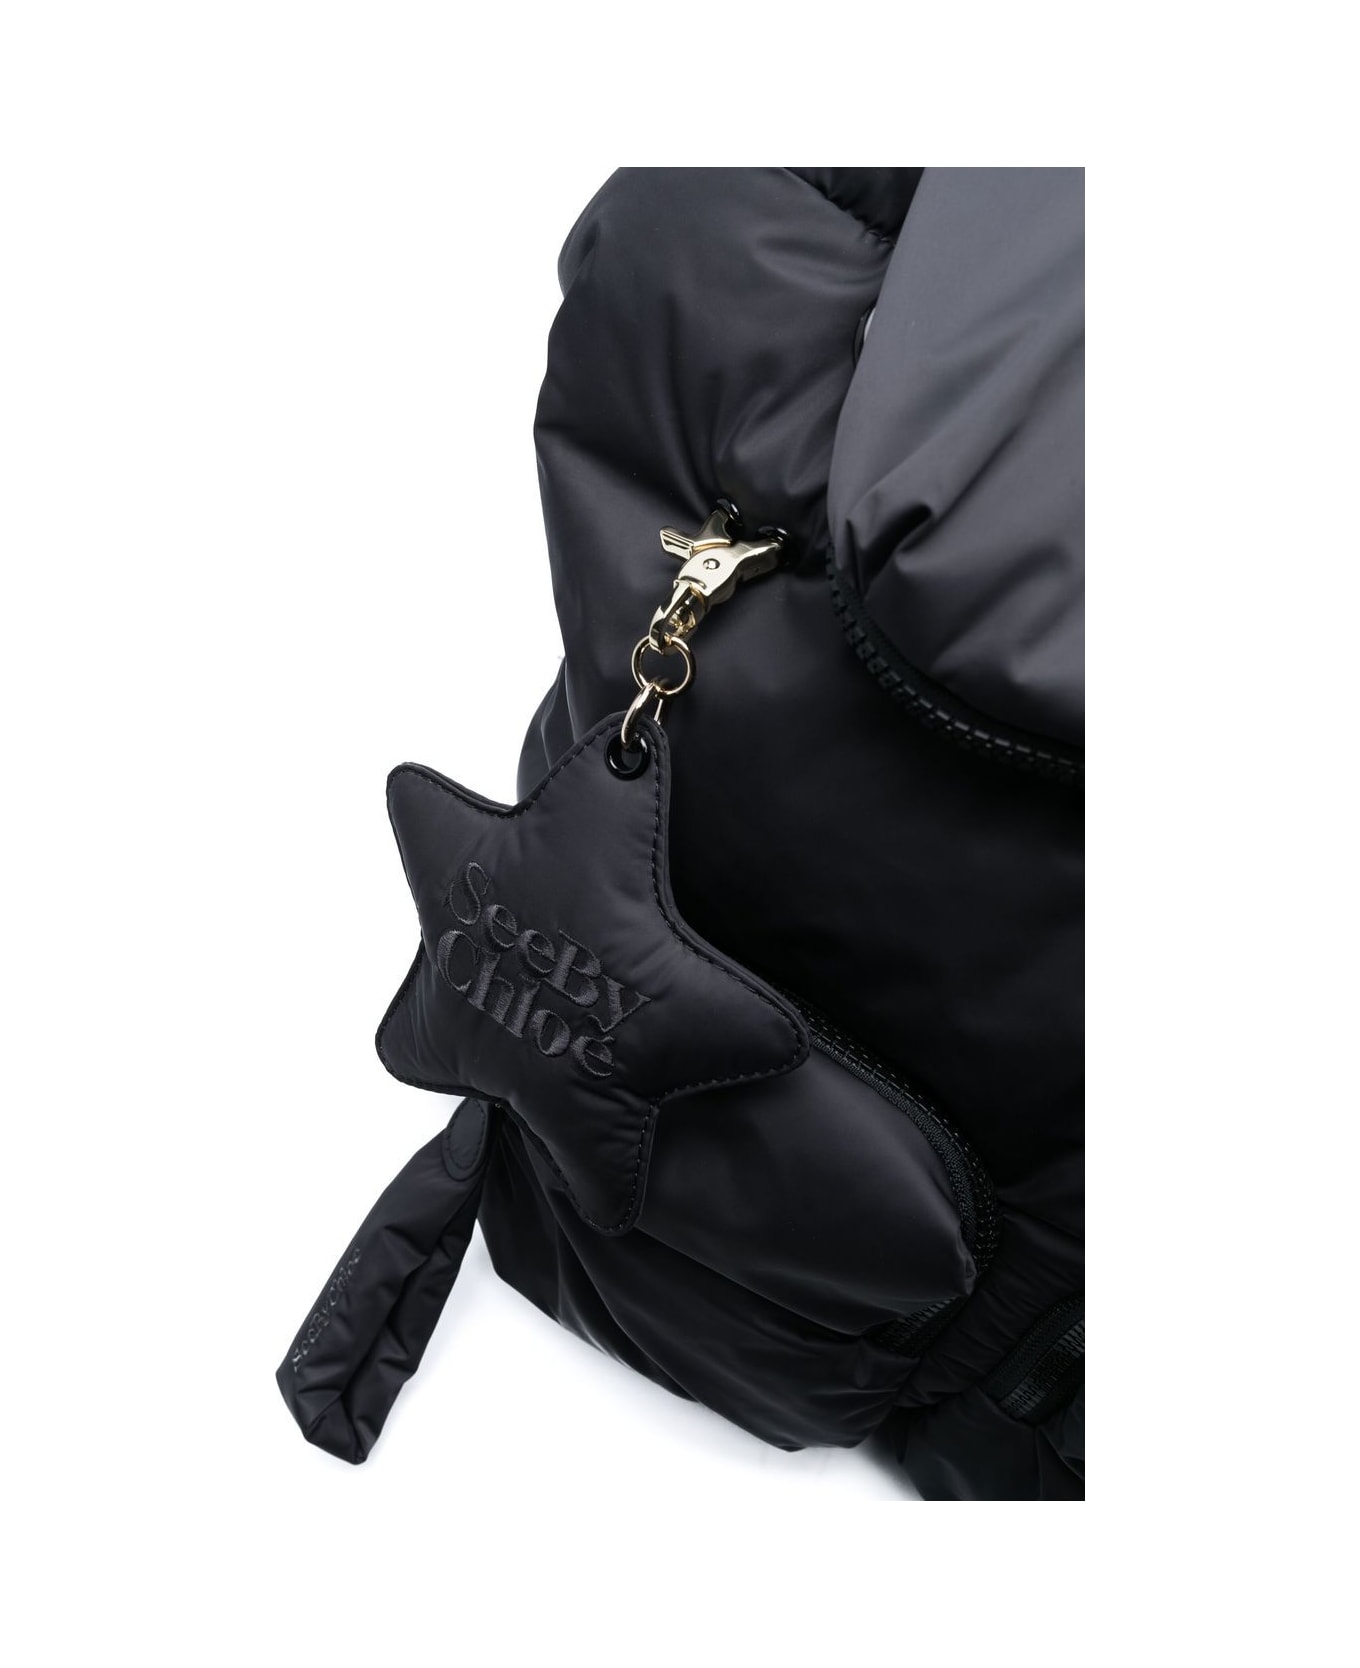 See by Chloé Chs16ss840 Joy Rider Backpack - Black バックパック